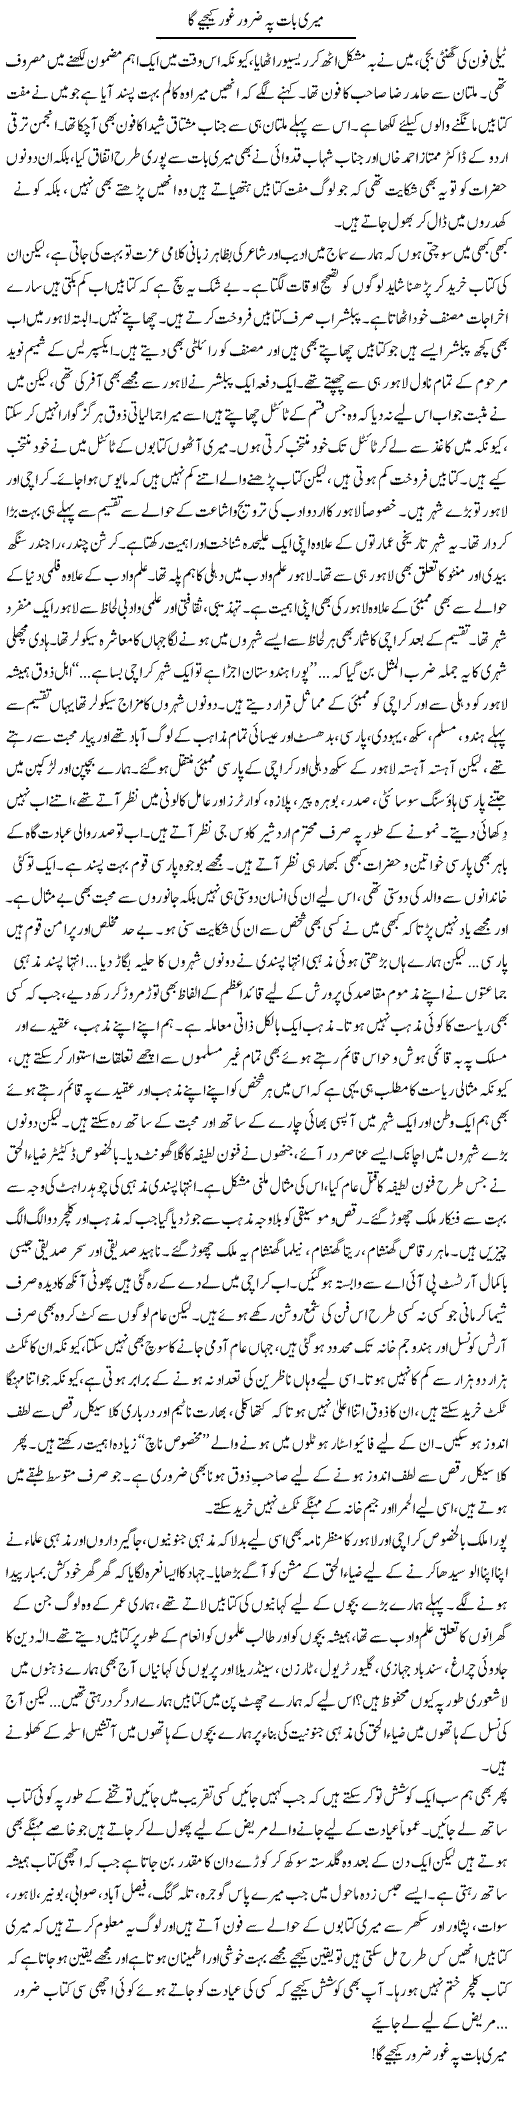 Think on My Point Express Column Raees Fatima 26 September 2010